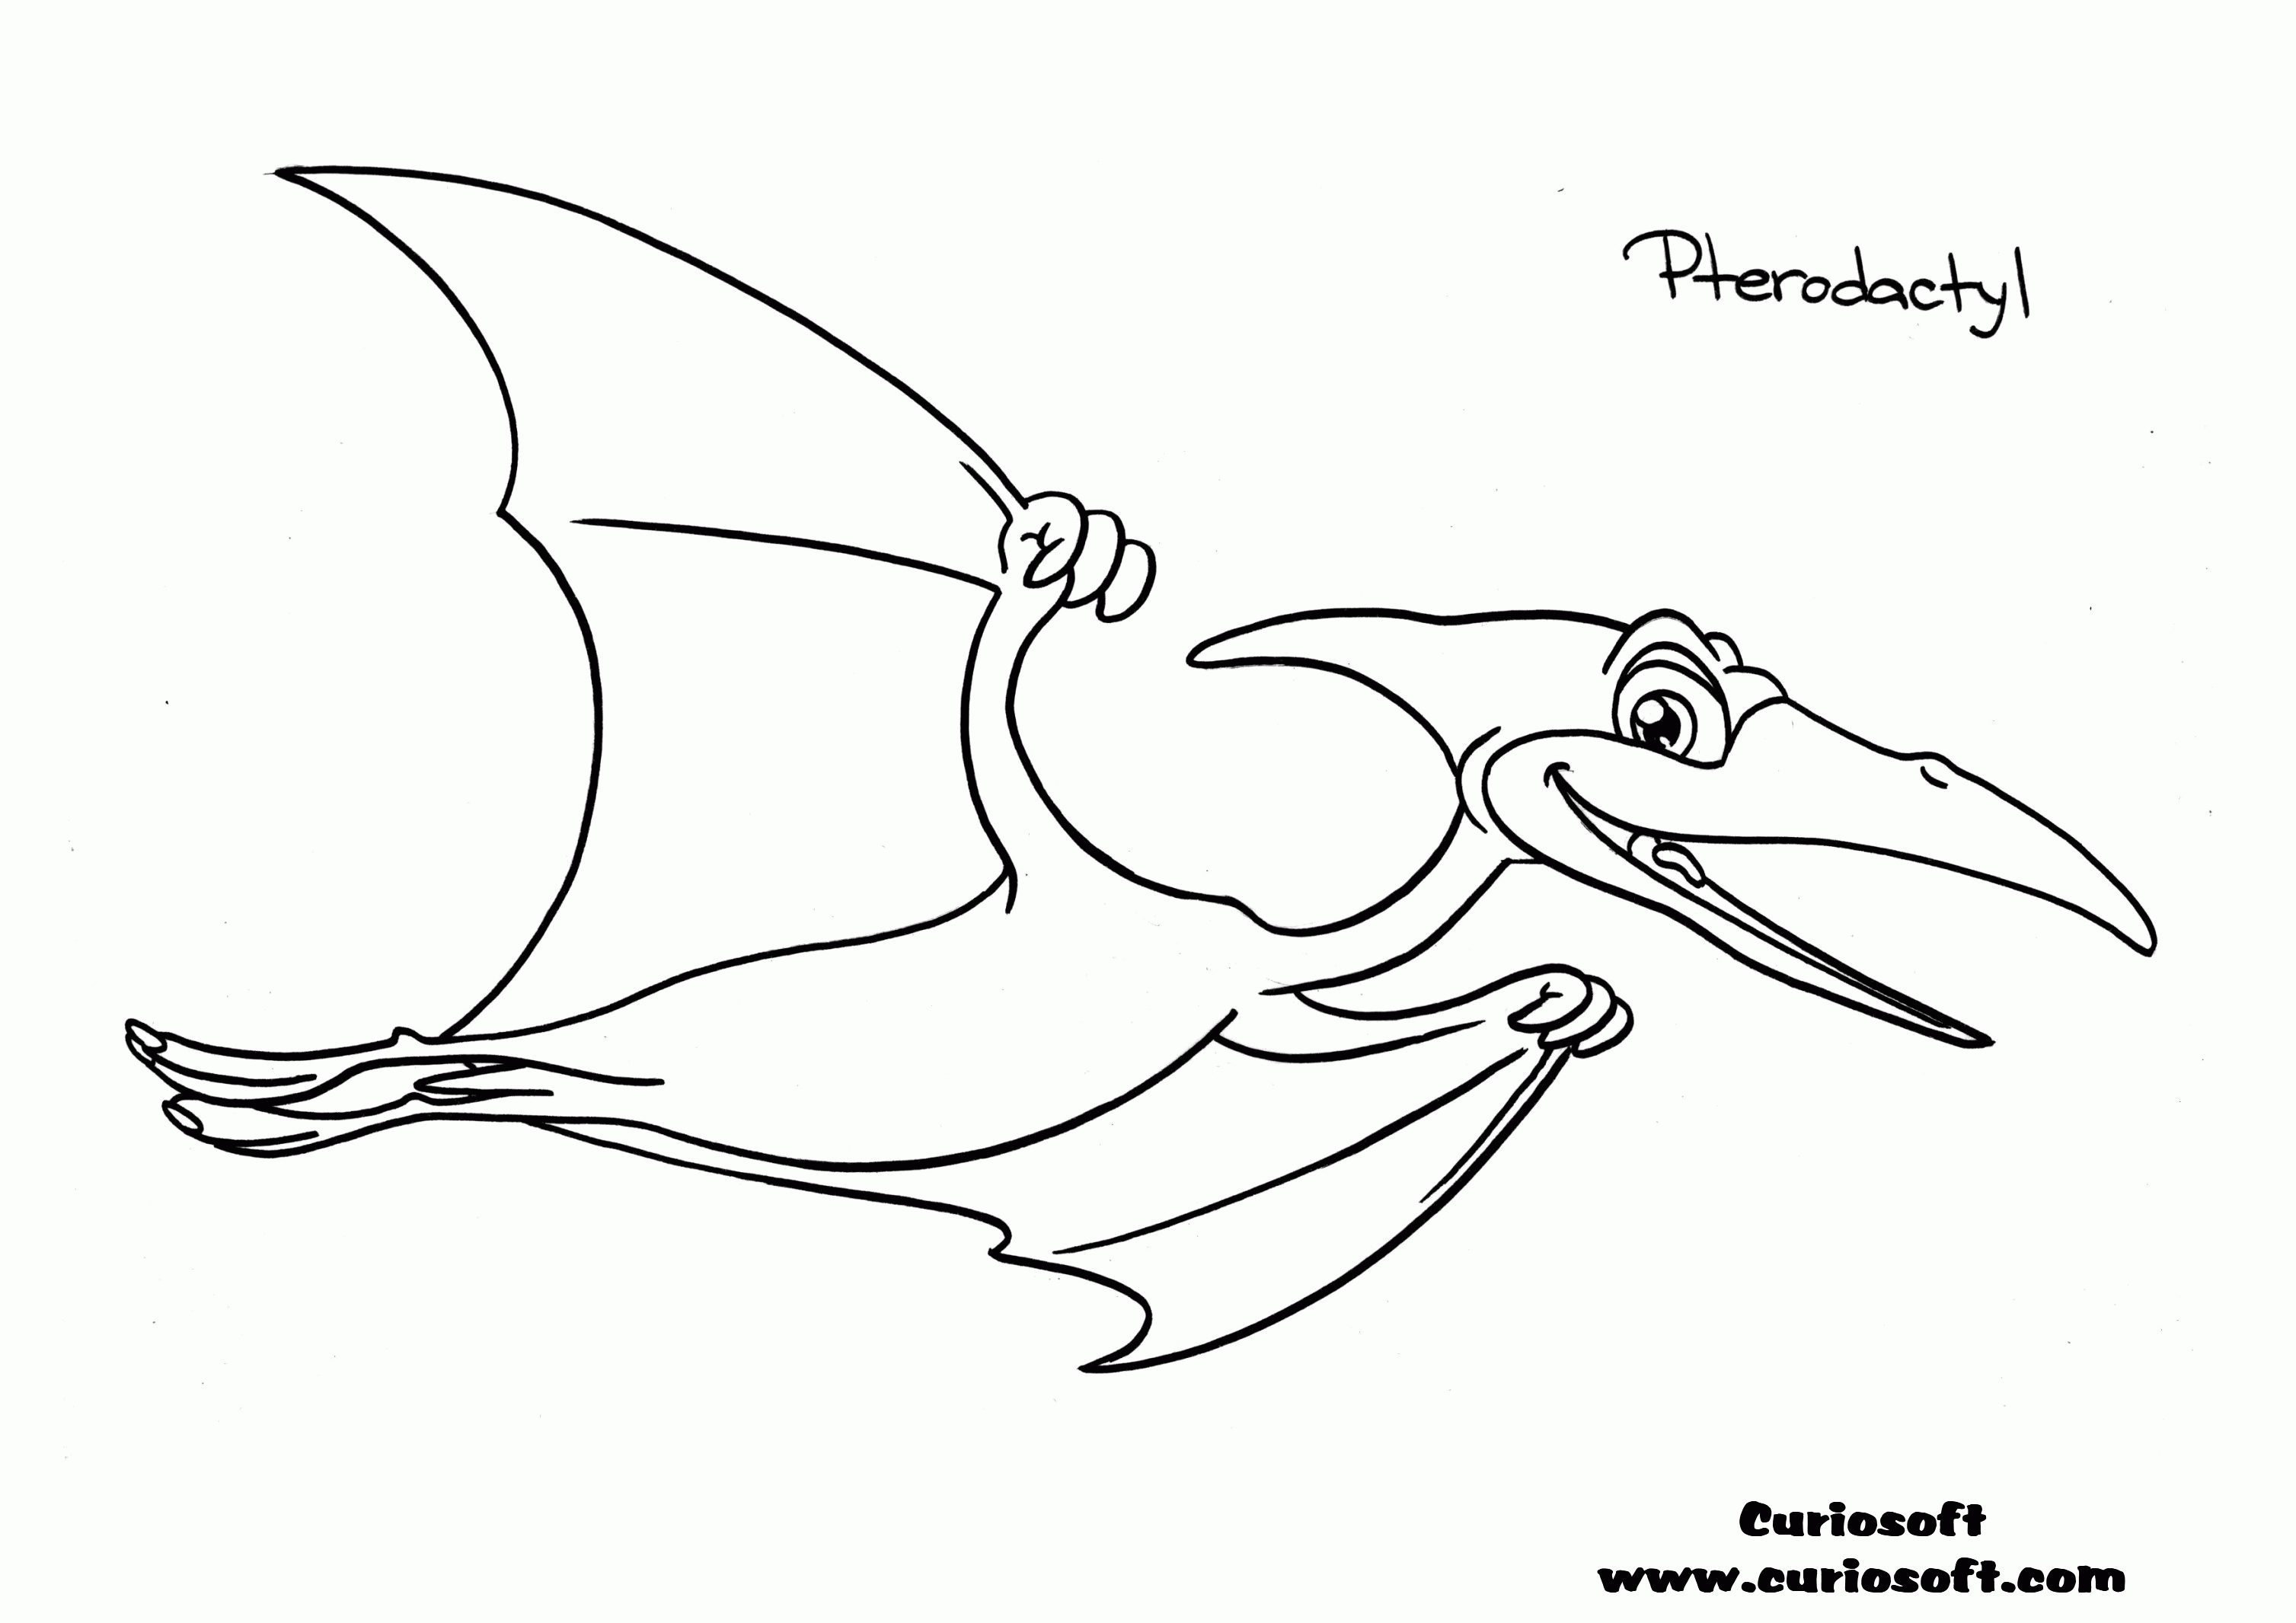 Pterodactyl Coloring Pages | Dinosaurs Pictures And Facts ...